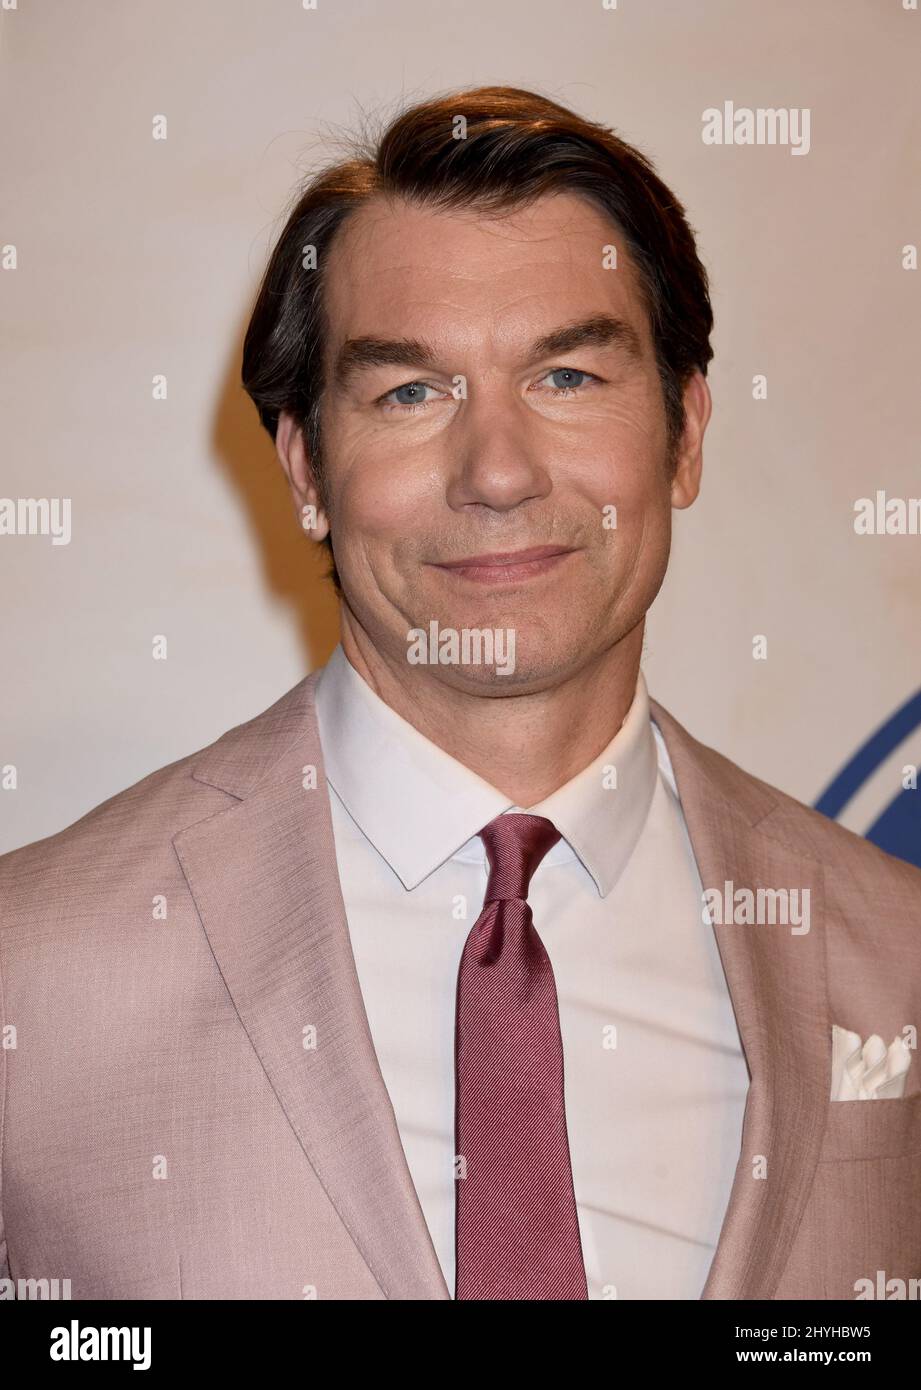 Jerry O'Connell at Hallmark Channel's '2019 American Rescue Dog Show' held at the Fairplex at Pomona on January 13, 2019 in Pomona, Ca. Stock Photo